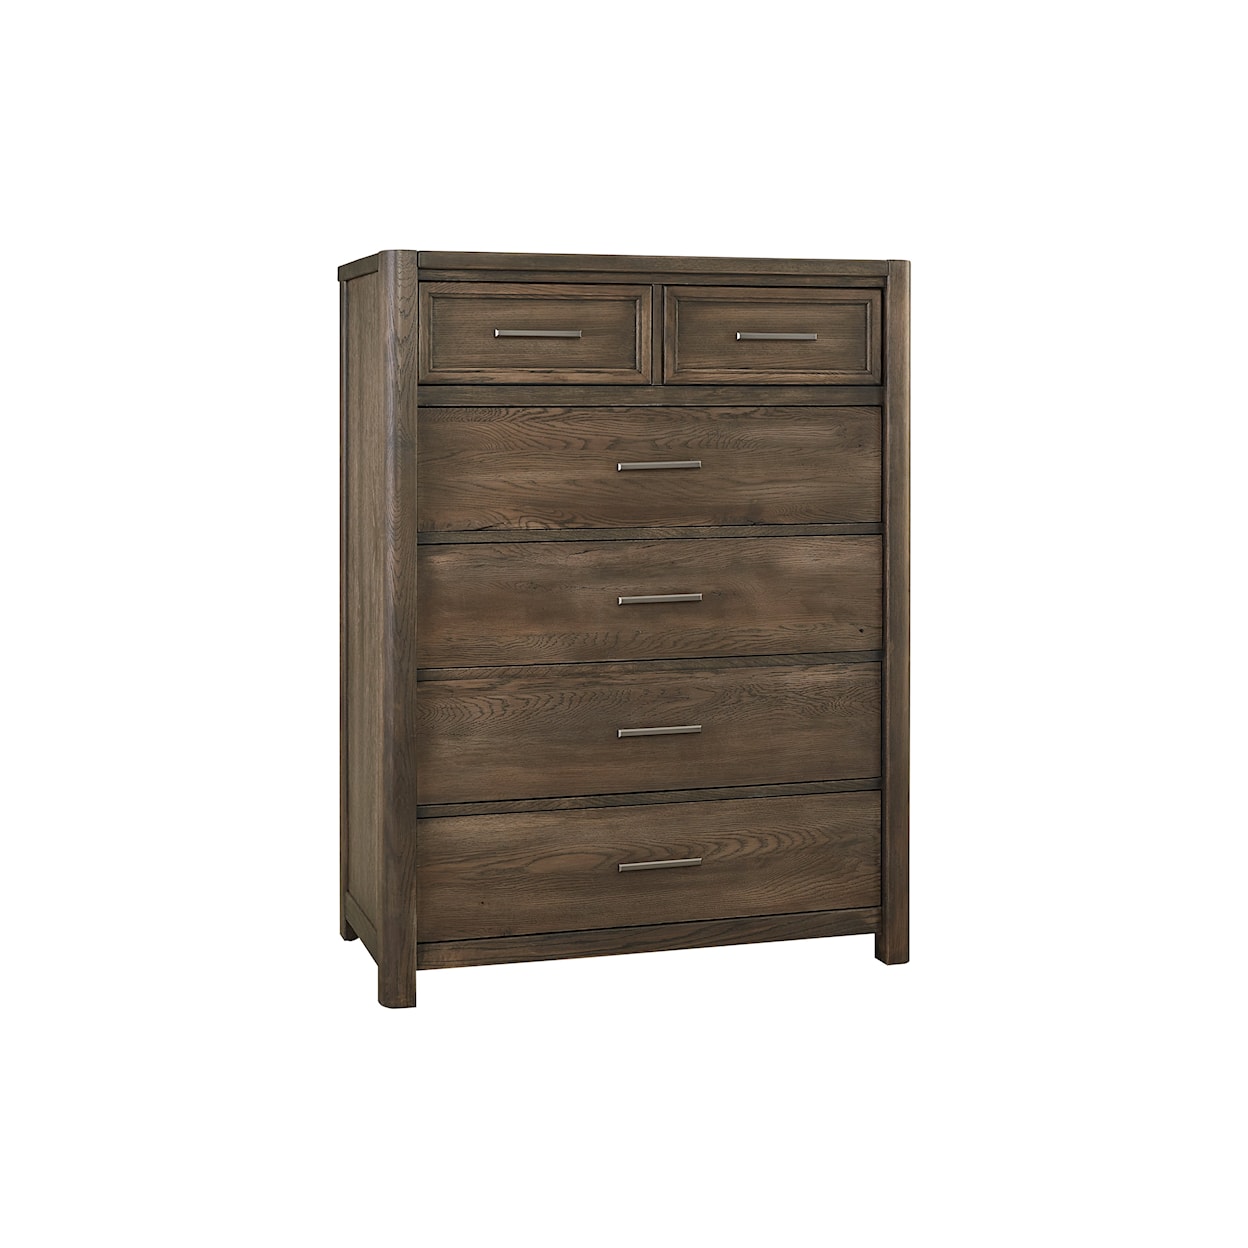 Laurel Mercantile Co. Crafted Oak Chest of Drawers